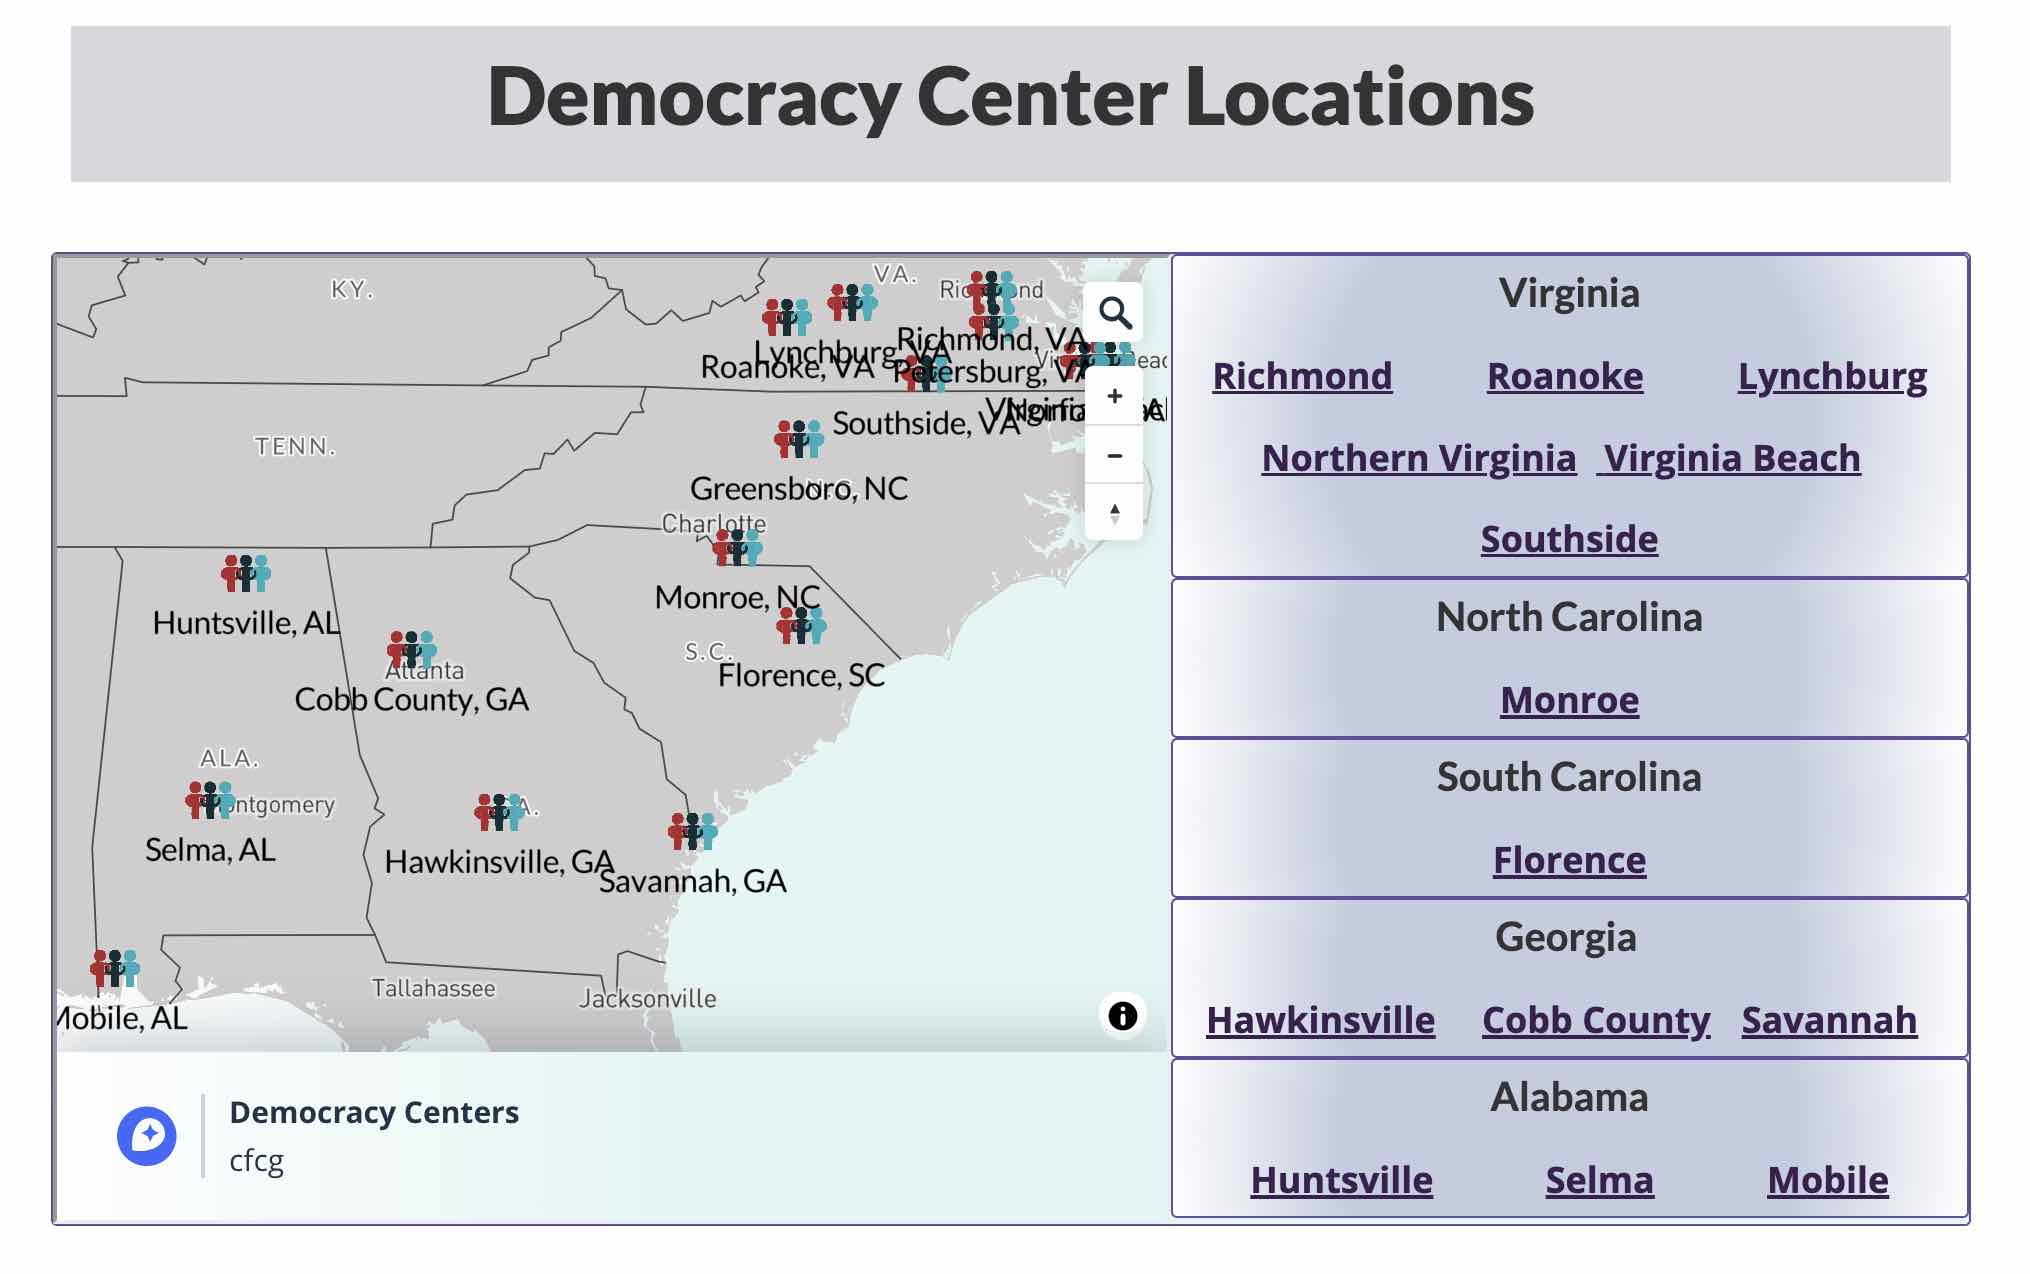 Democracy Centers empower voters of color in marginalized communities